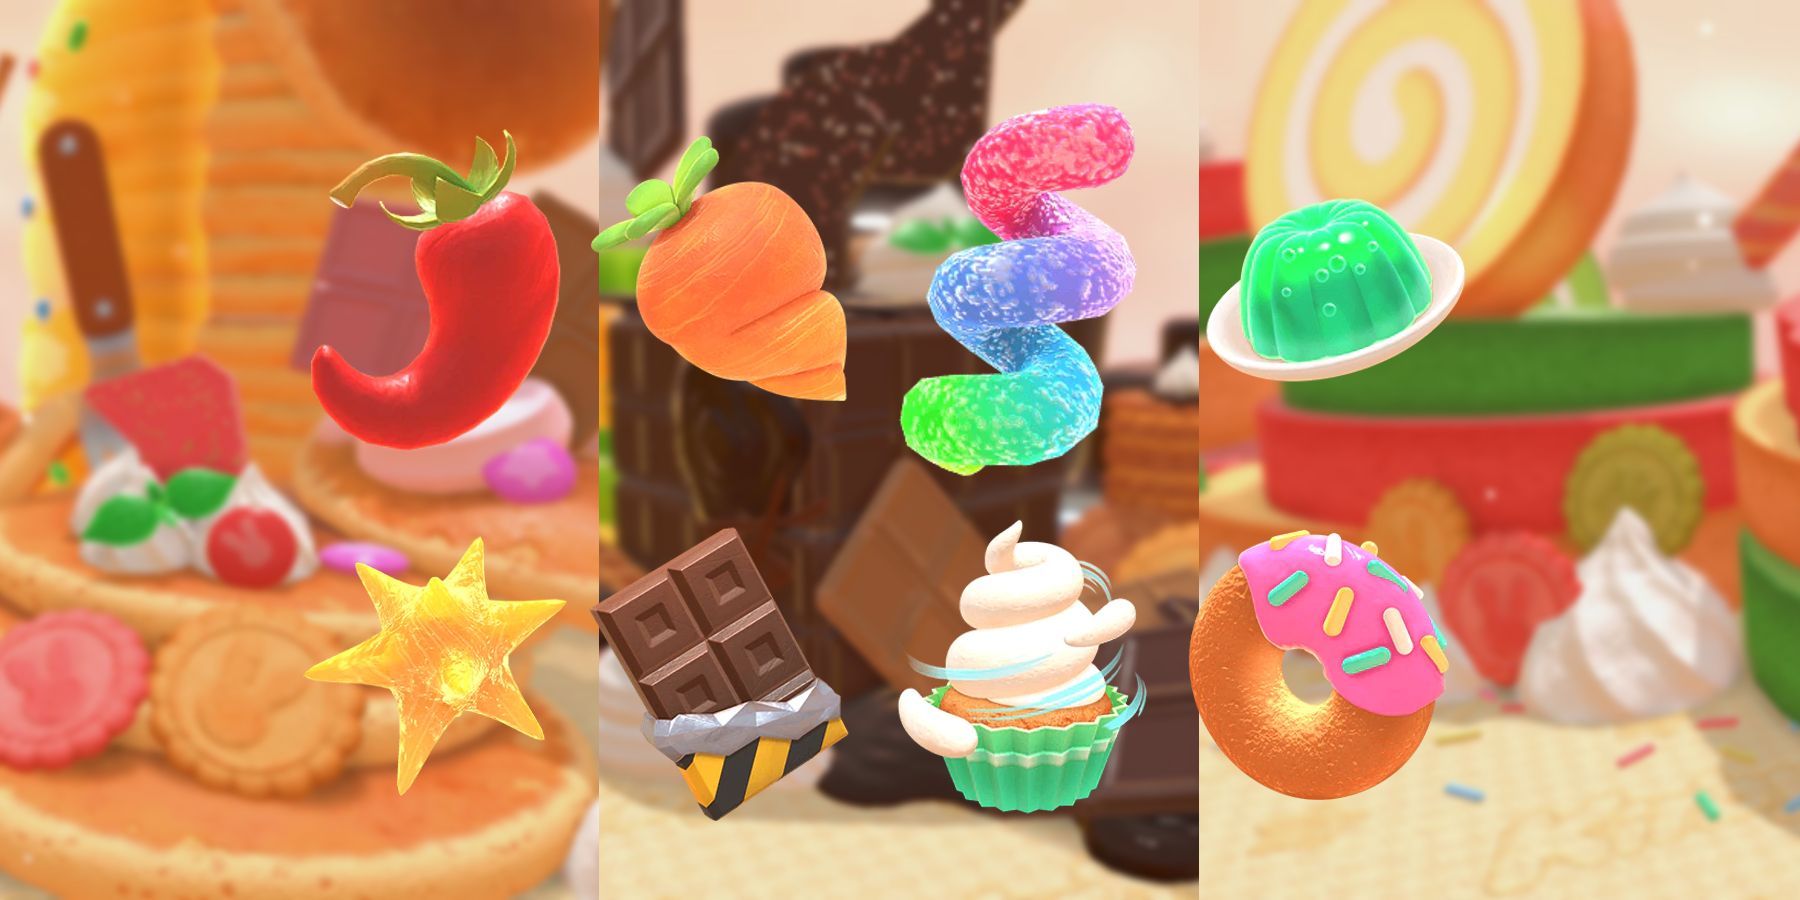 pepper carrot gummy jelly candy chocolate frosting donut nintendo hal laboratory